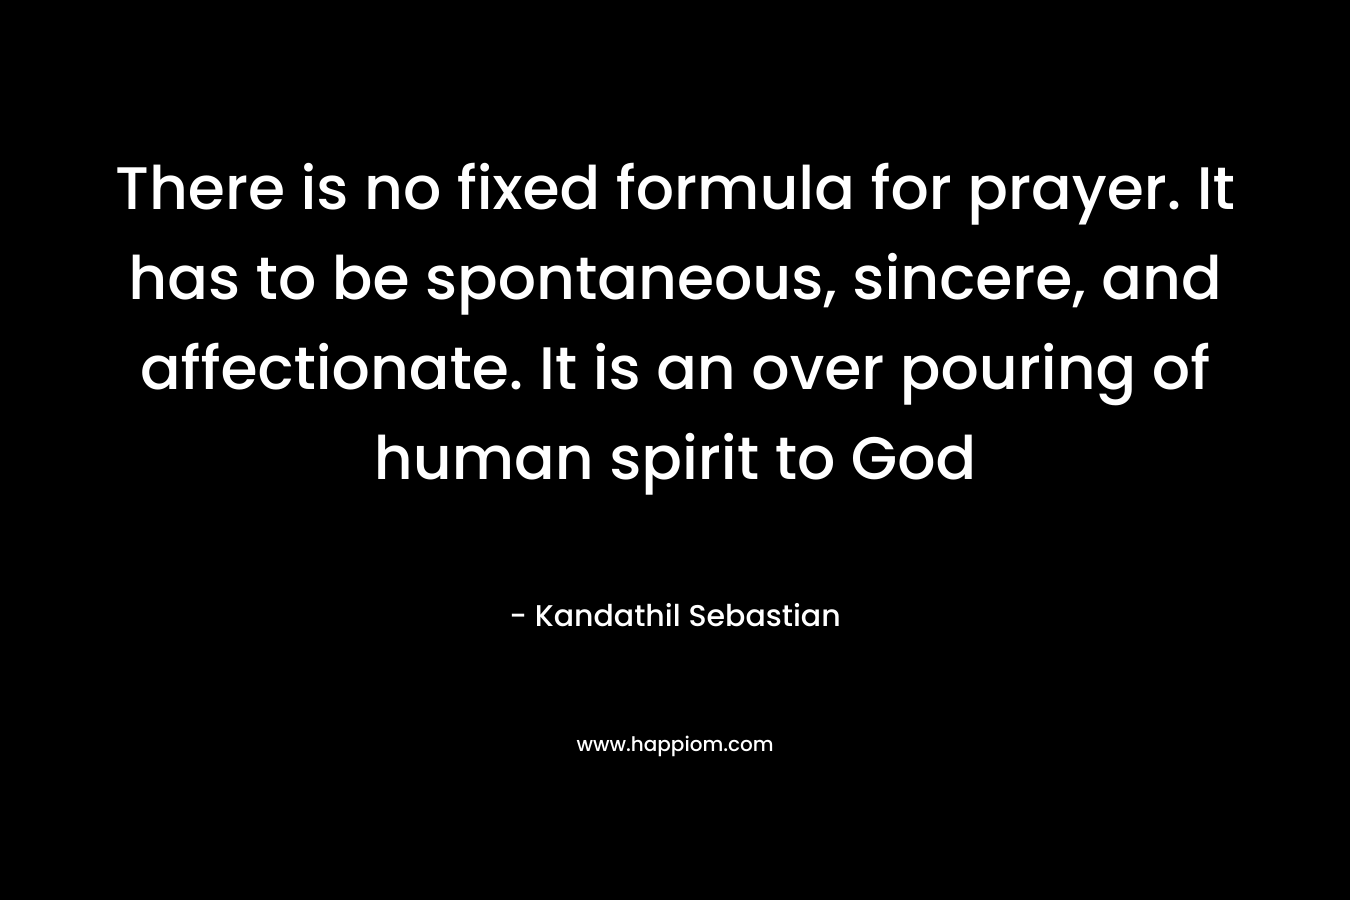 There is no fixed formula for prayer. It has to be spontaneous, sincere, and affectionate. It is an over pouring of human spirit to God